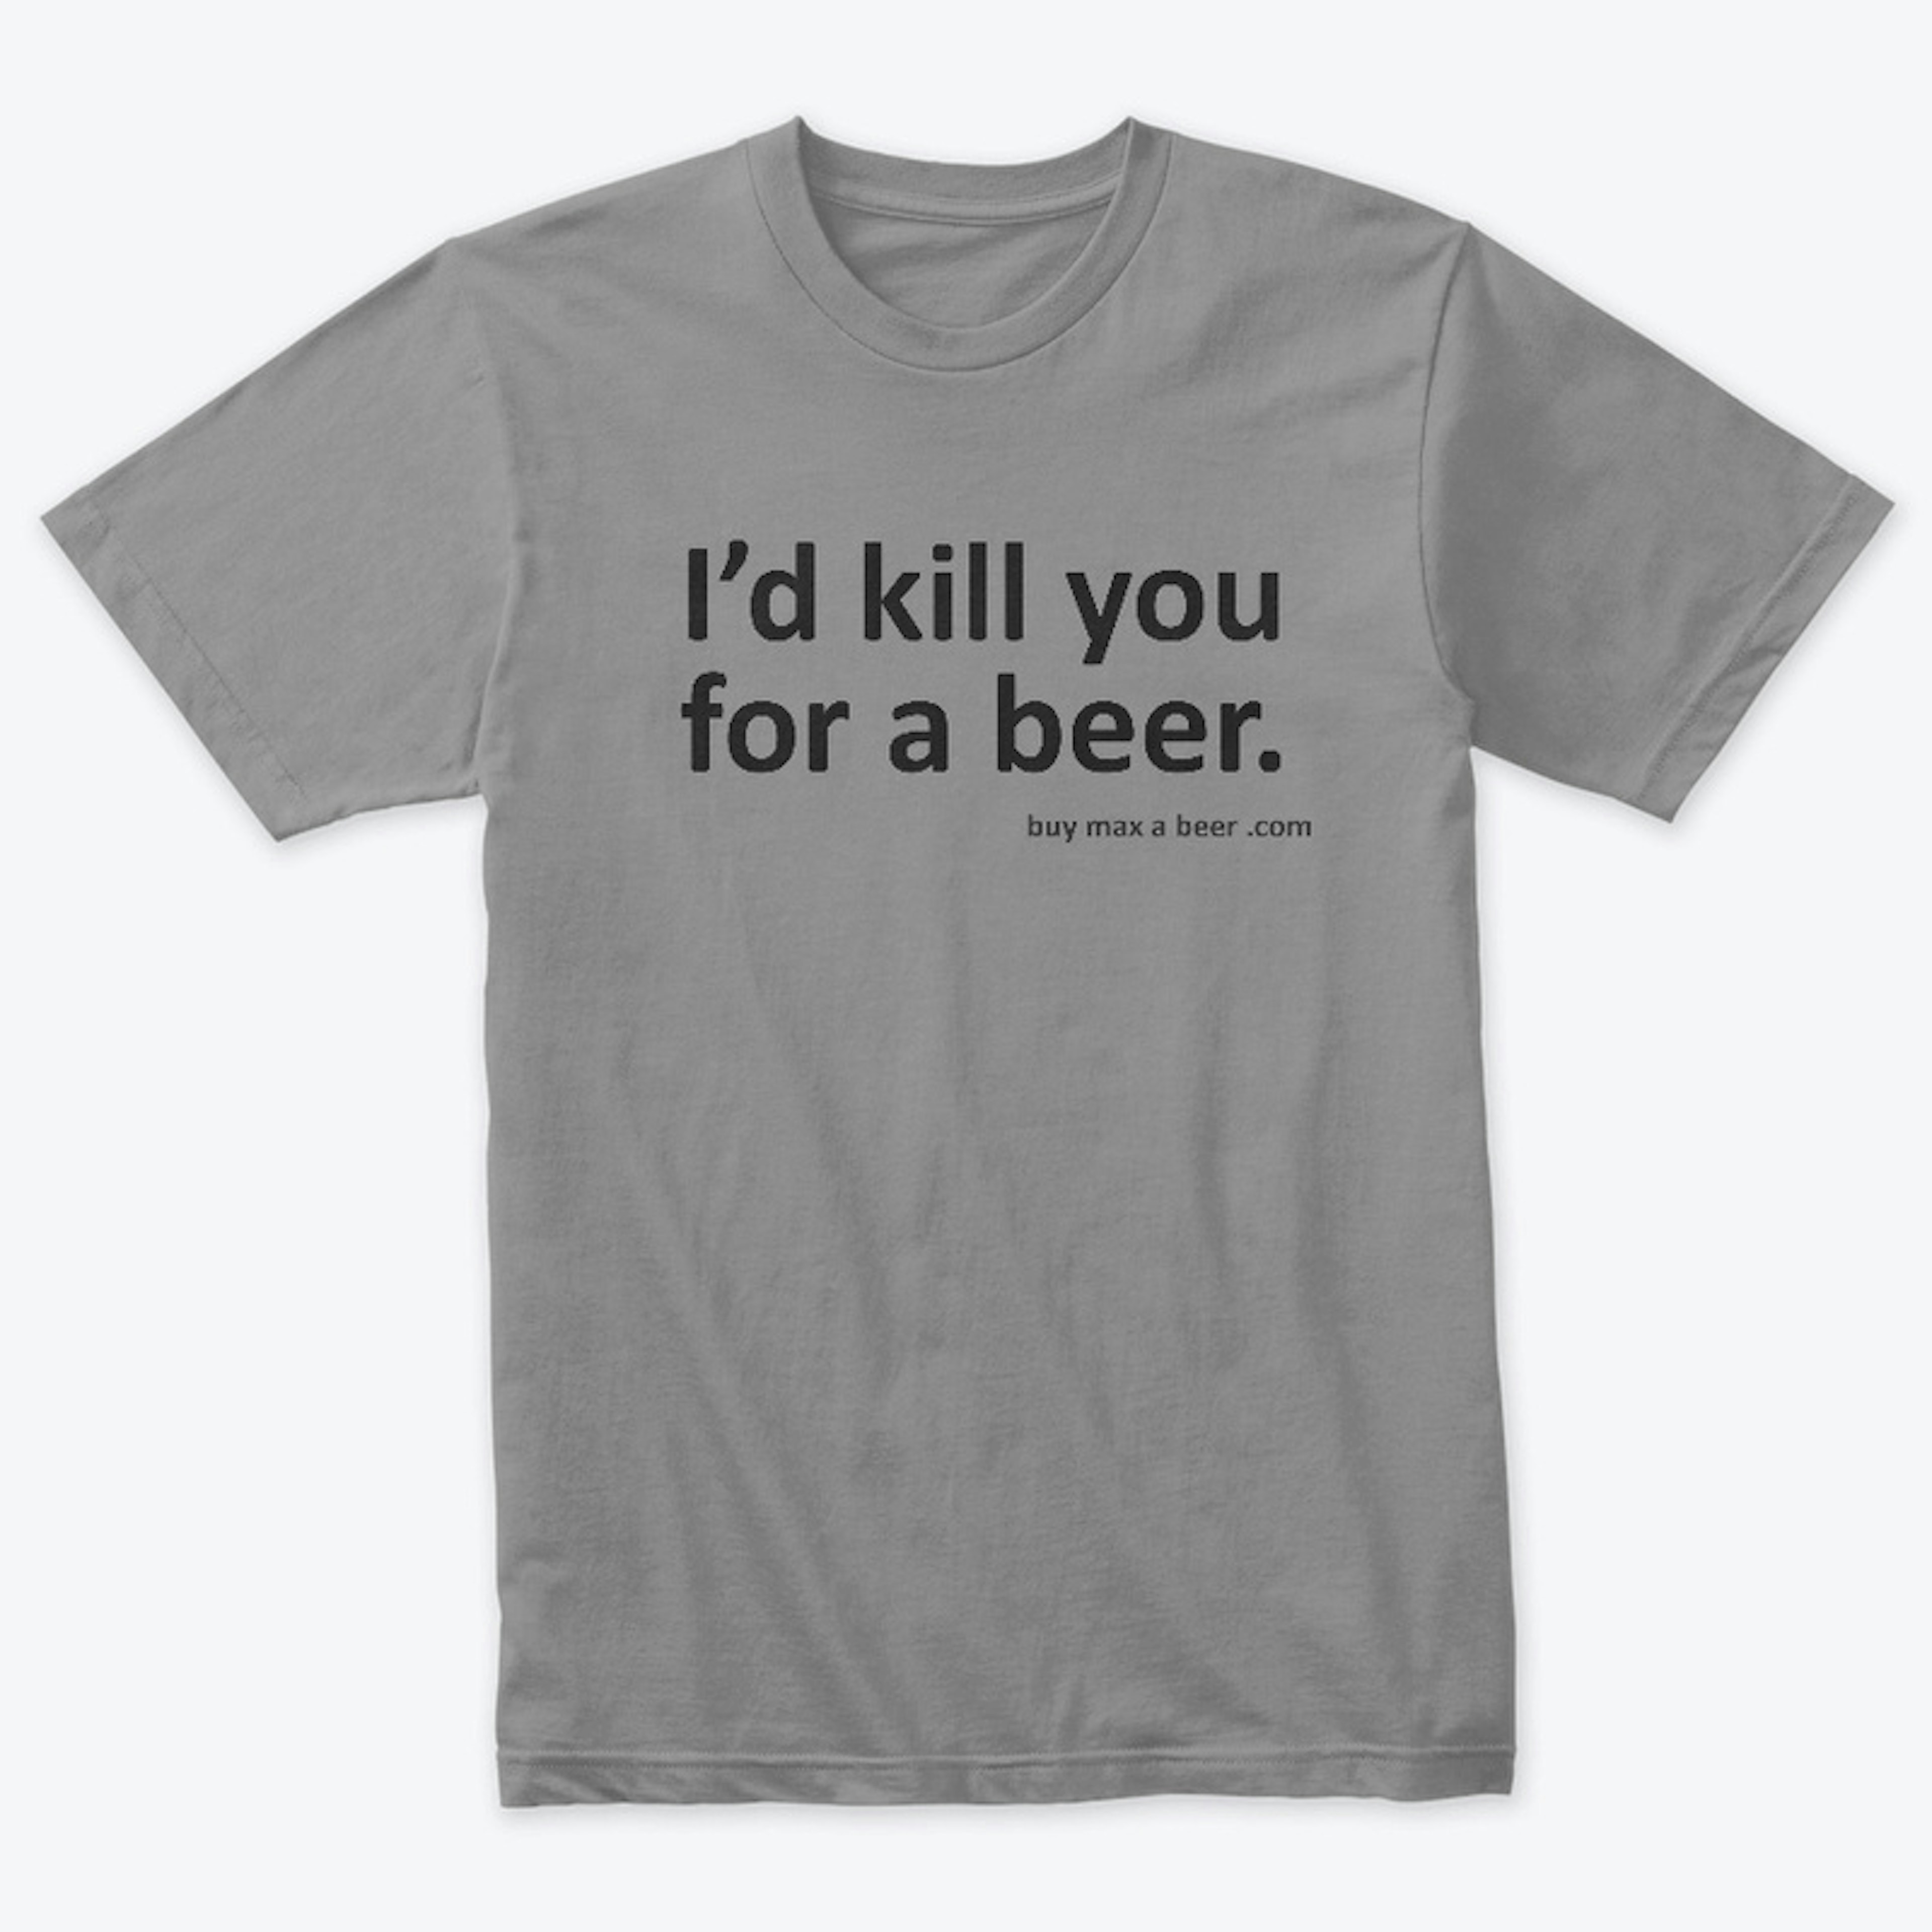 I'd Kill you for a beer 